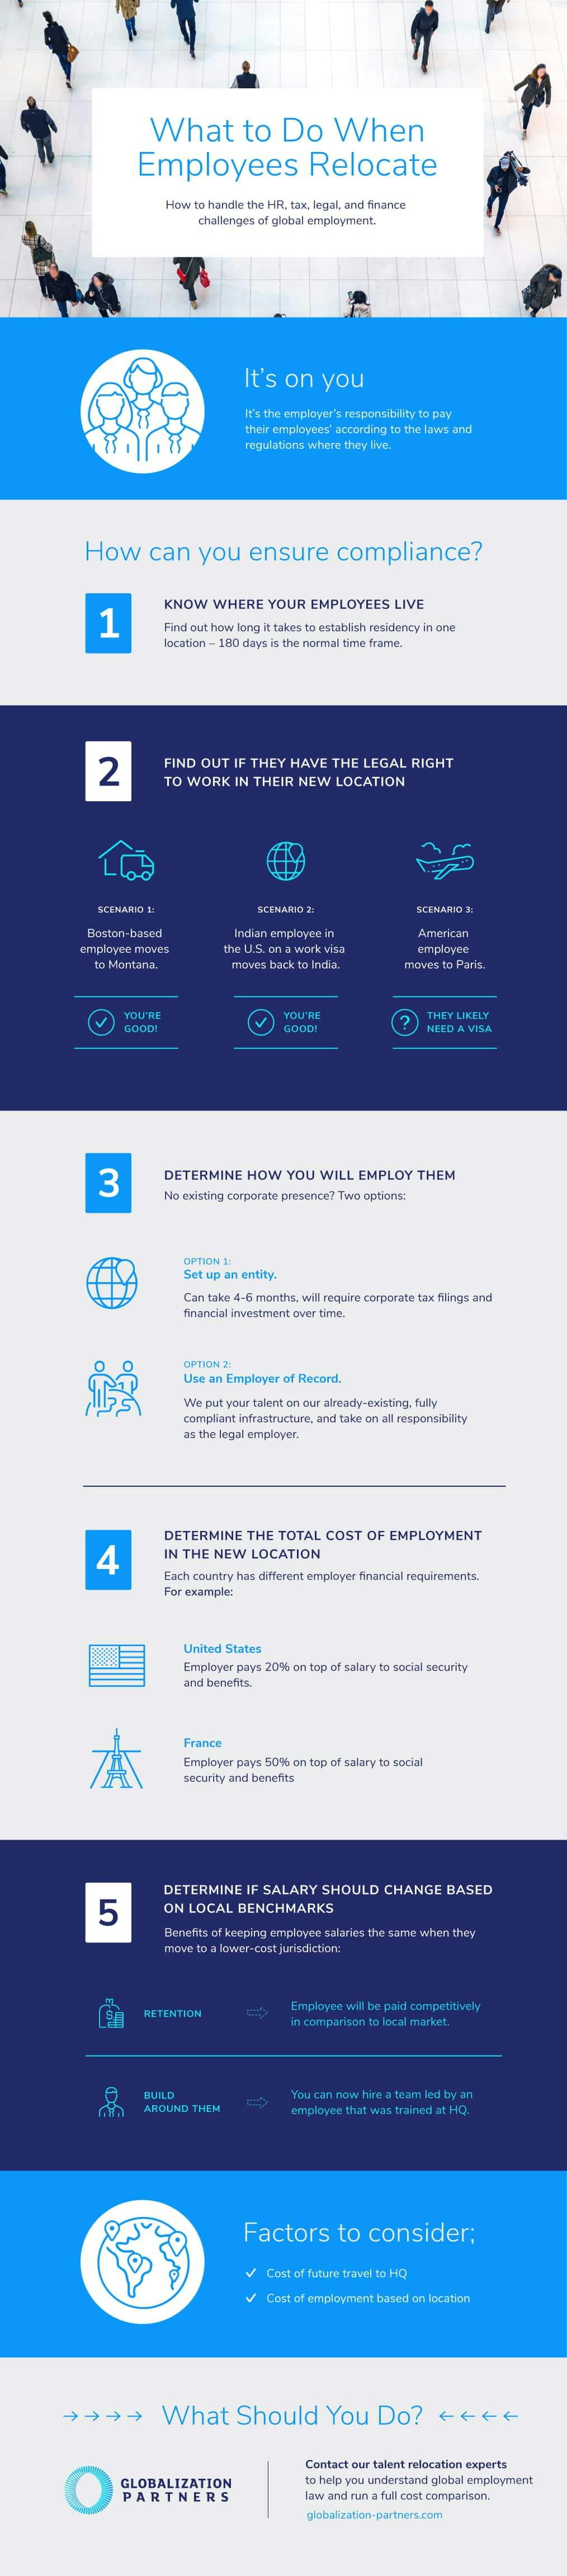 infographic-employee-relocation-global-mobility-43.jpg